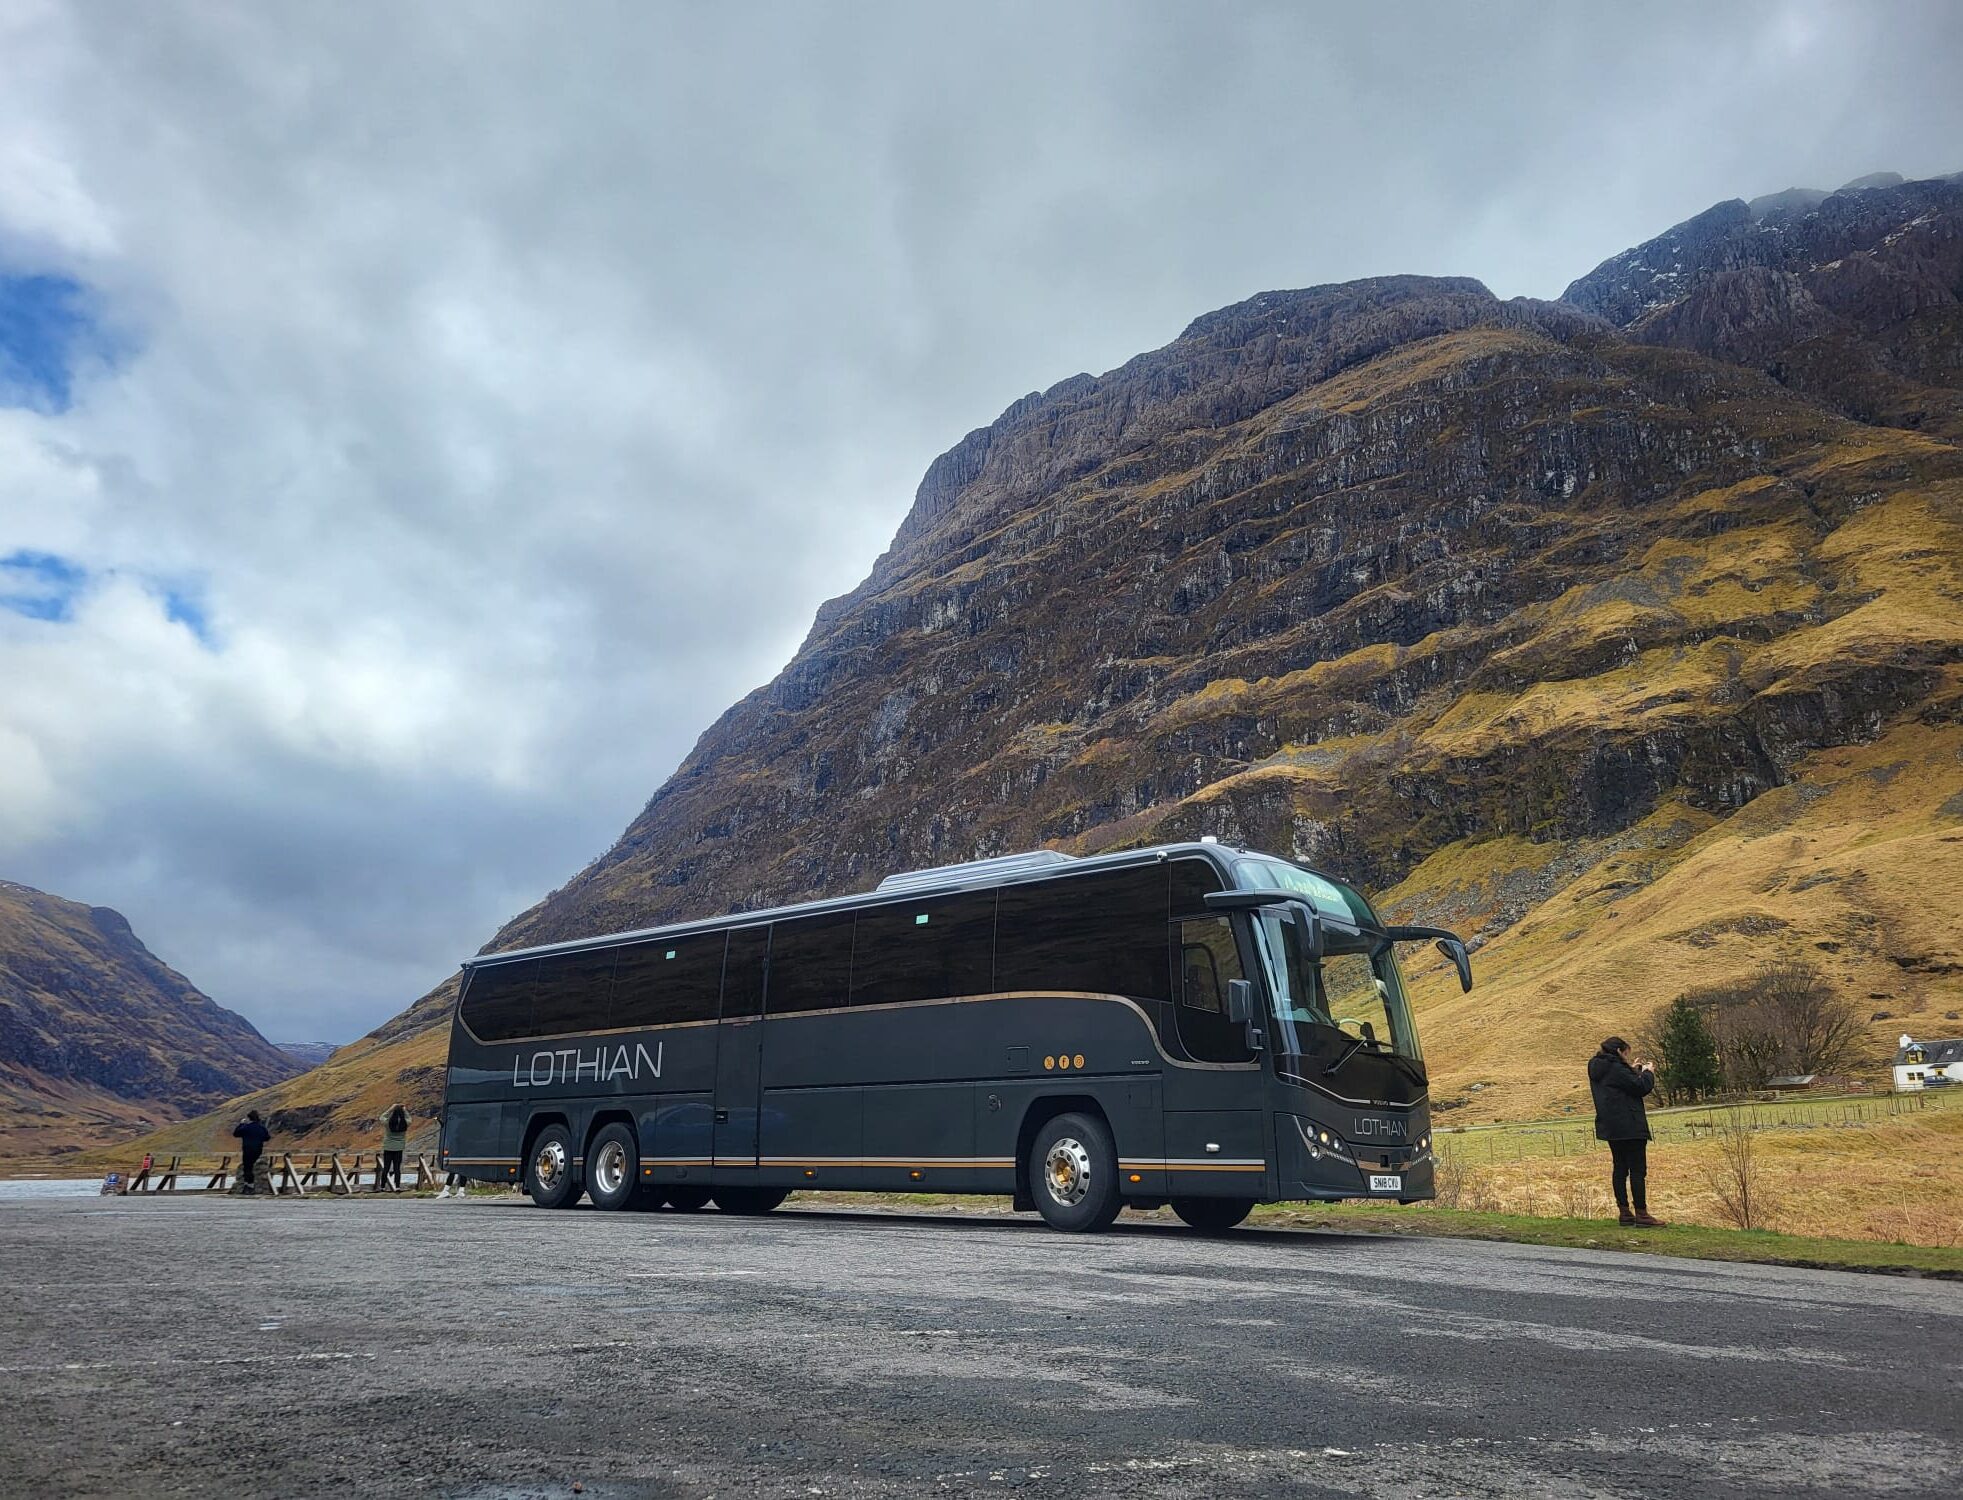 Join us on a staff tour to Loch Ness